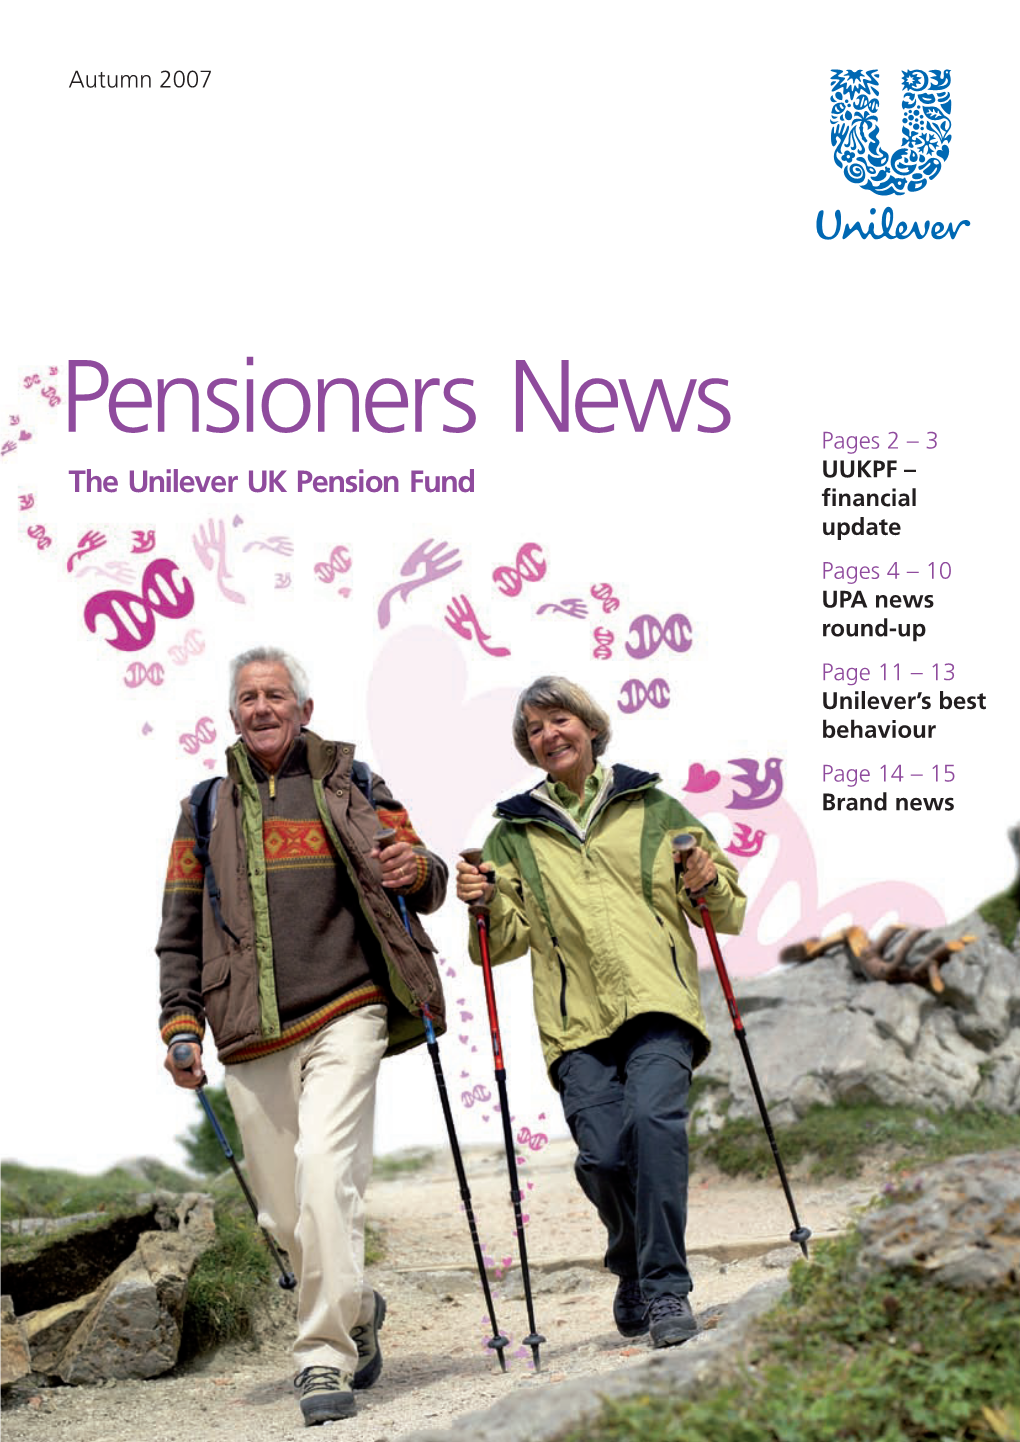 Pensioners News Autumn 2007 Asset Allocation (As at 31 March 2007)